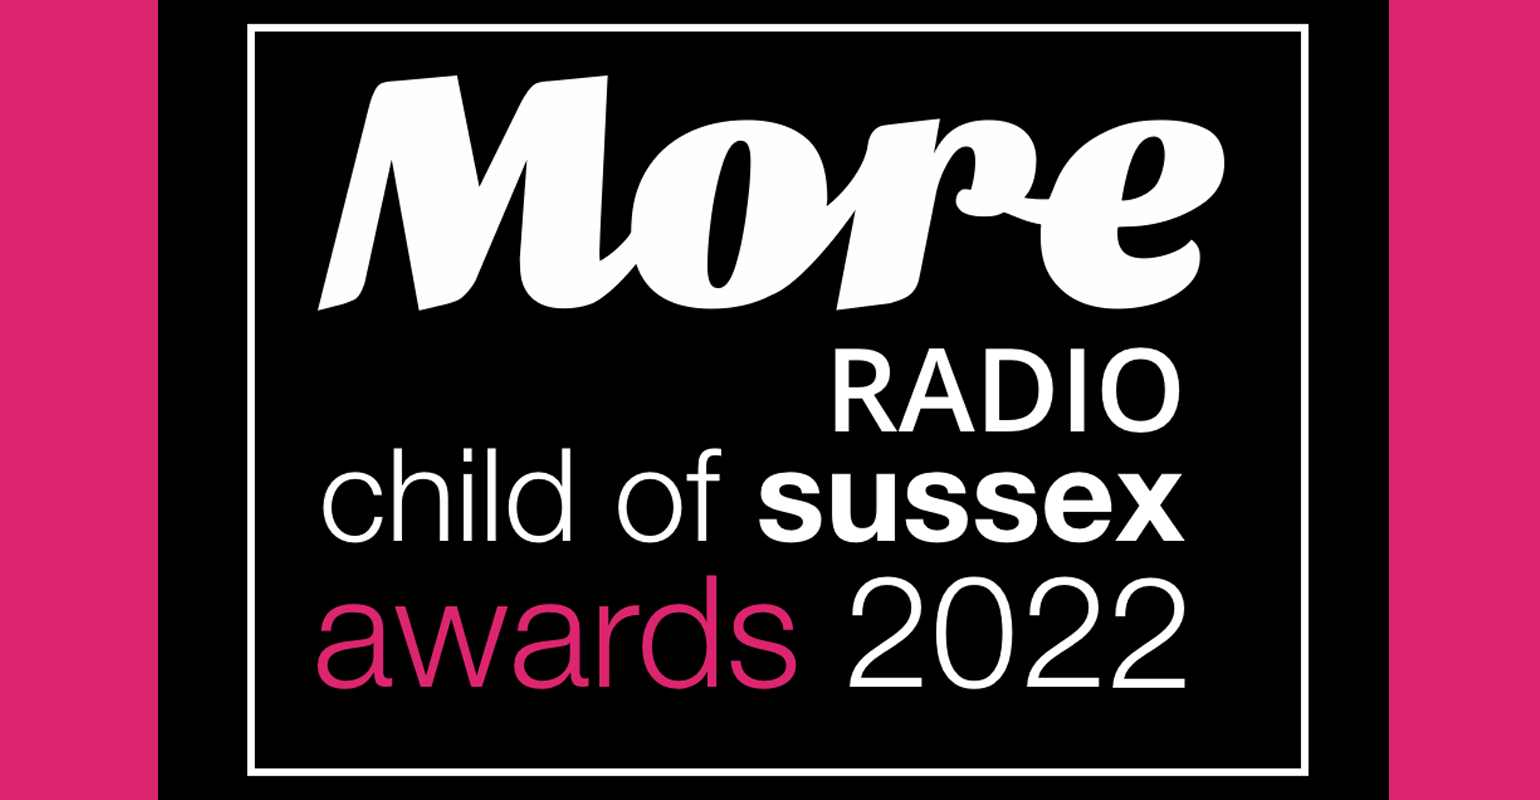 Child of Sussex Awards